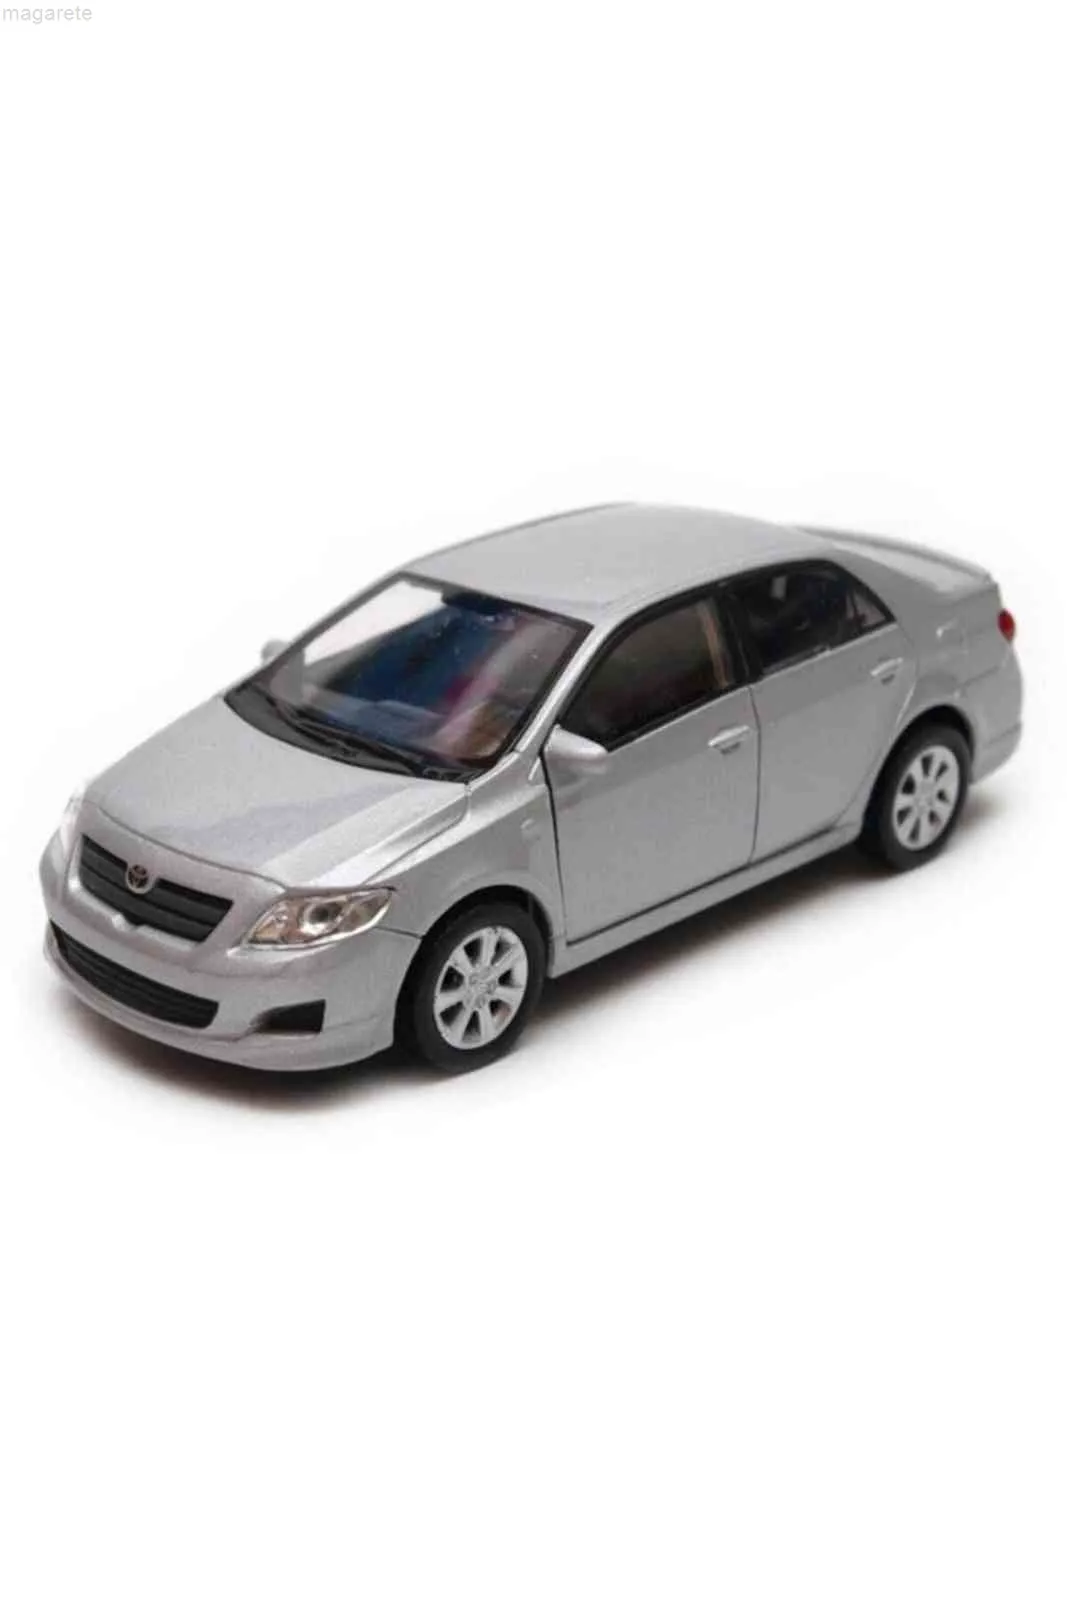 Children's pressure casting metal car, Toyota gray corolla model, 2009 toy series, Czech small gifts, birthday simulation, rubber wheel,